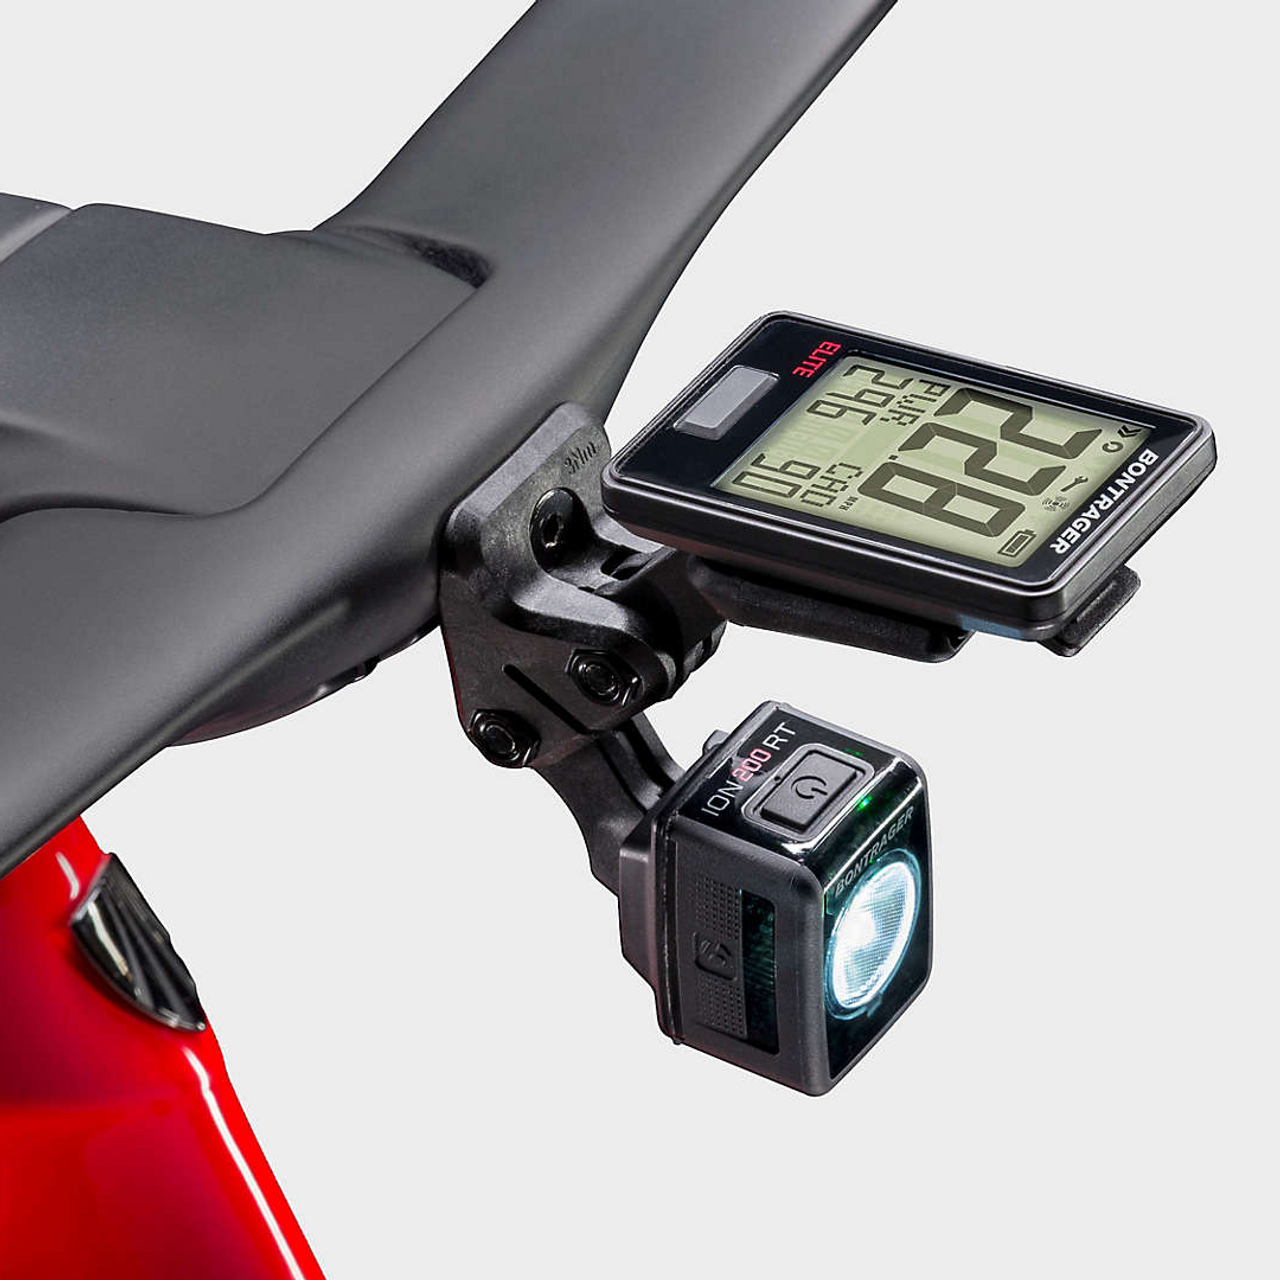 bontrager ridetime cycling computer